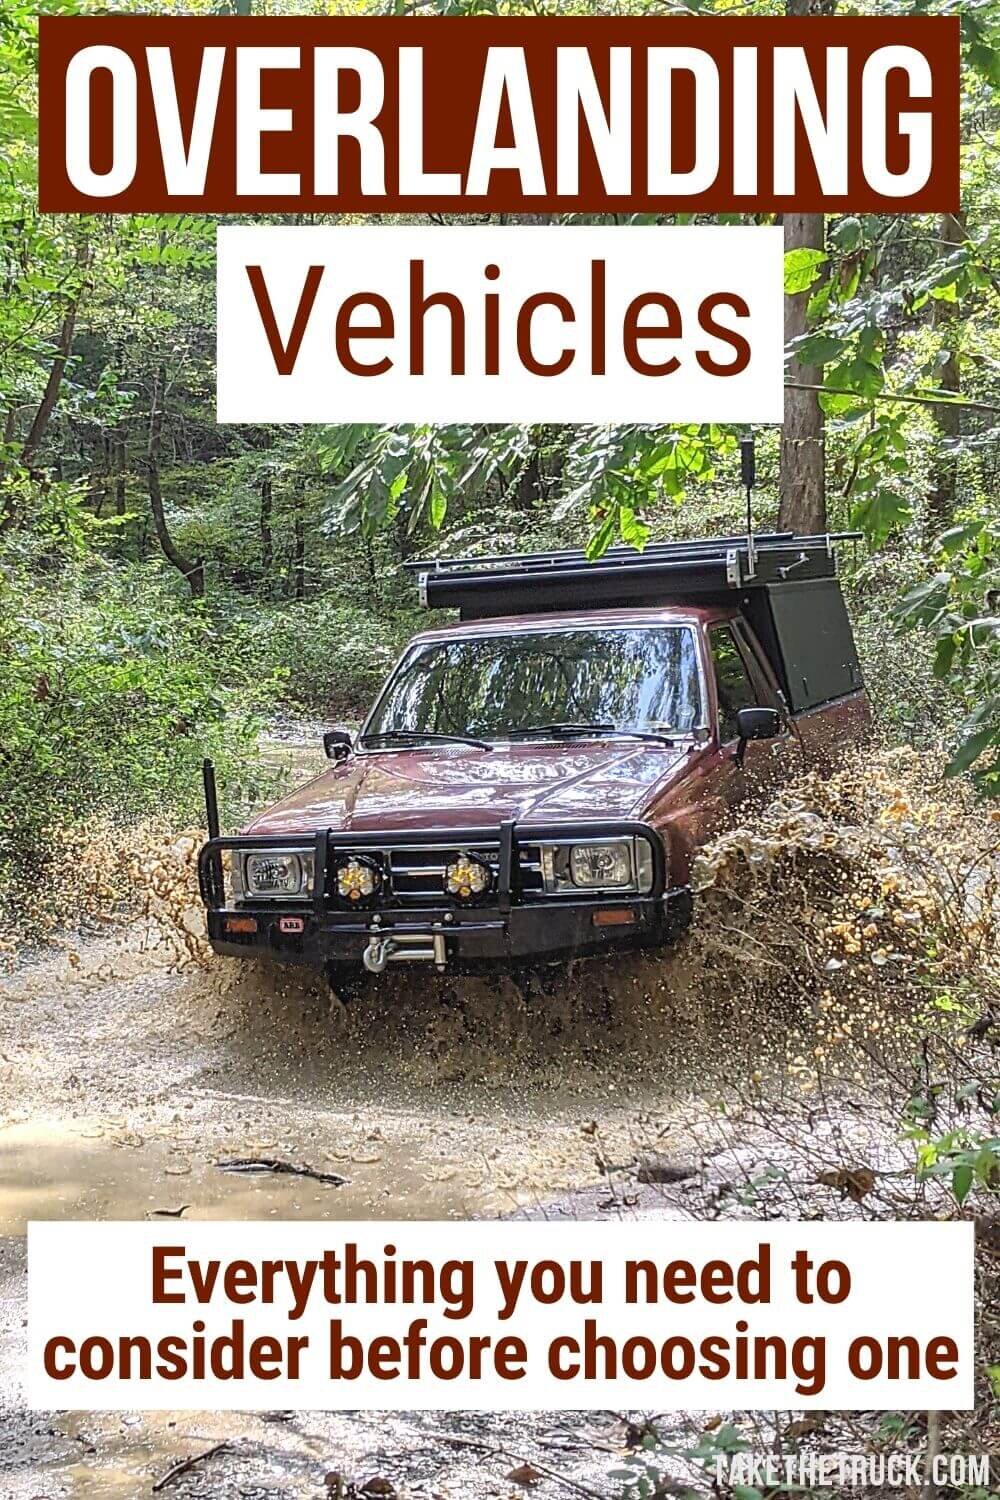 Looking for an overland vehicle? Nine different considerations are outlined, as are pros &amp; cons to different overlanding rigs - this guide can help you find the perfect overland truck or SUV. 